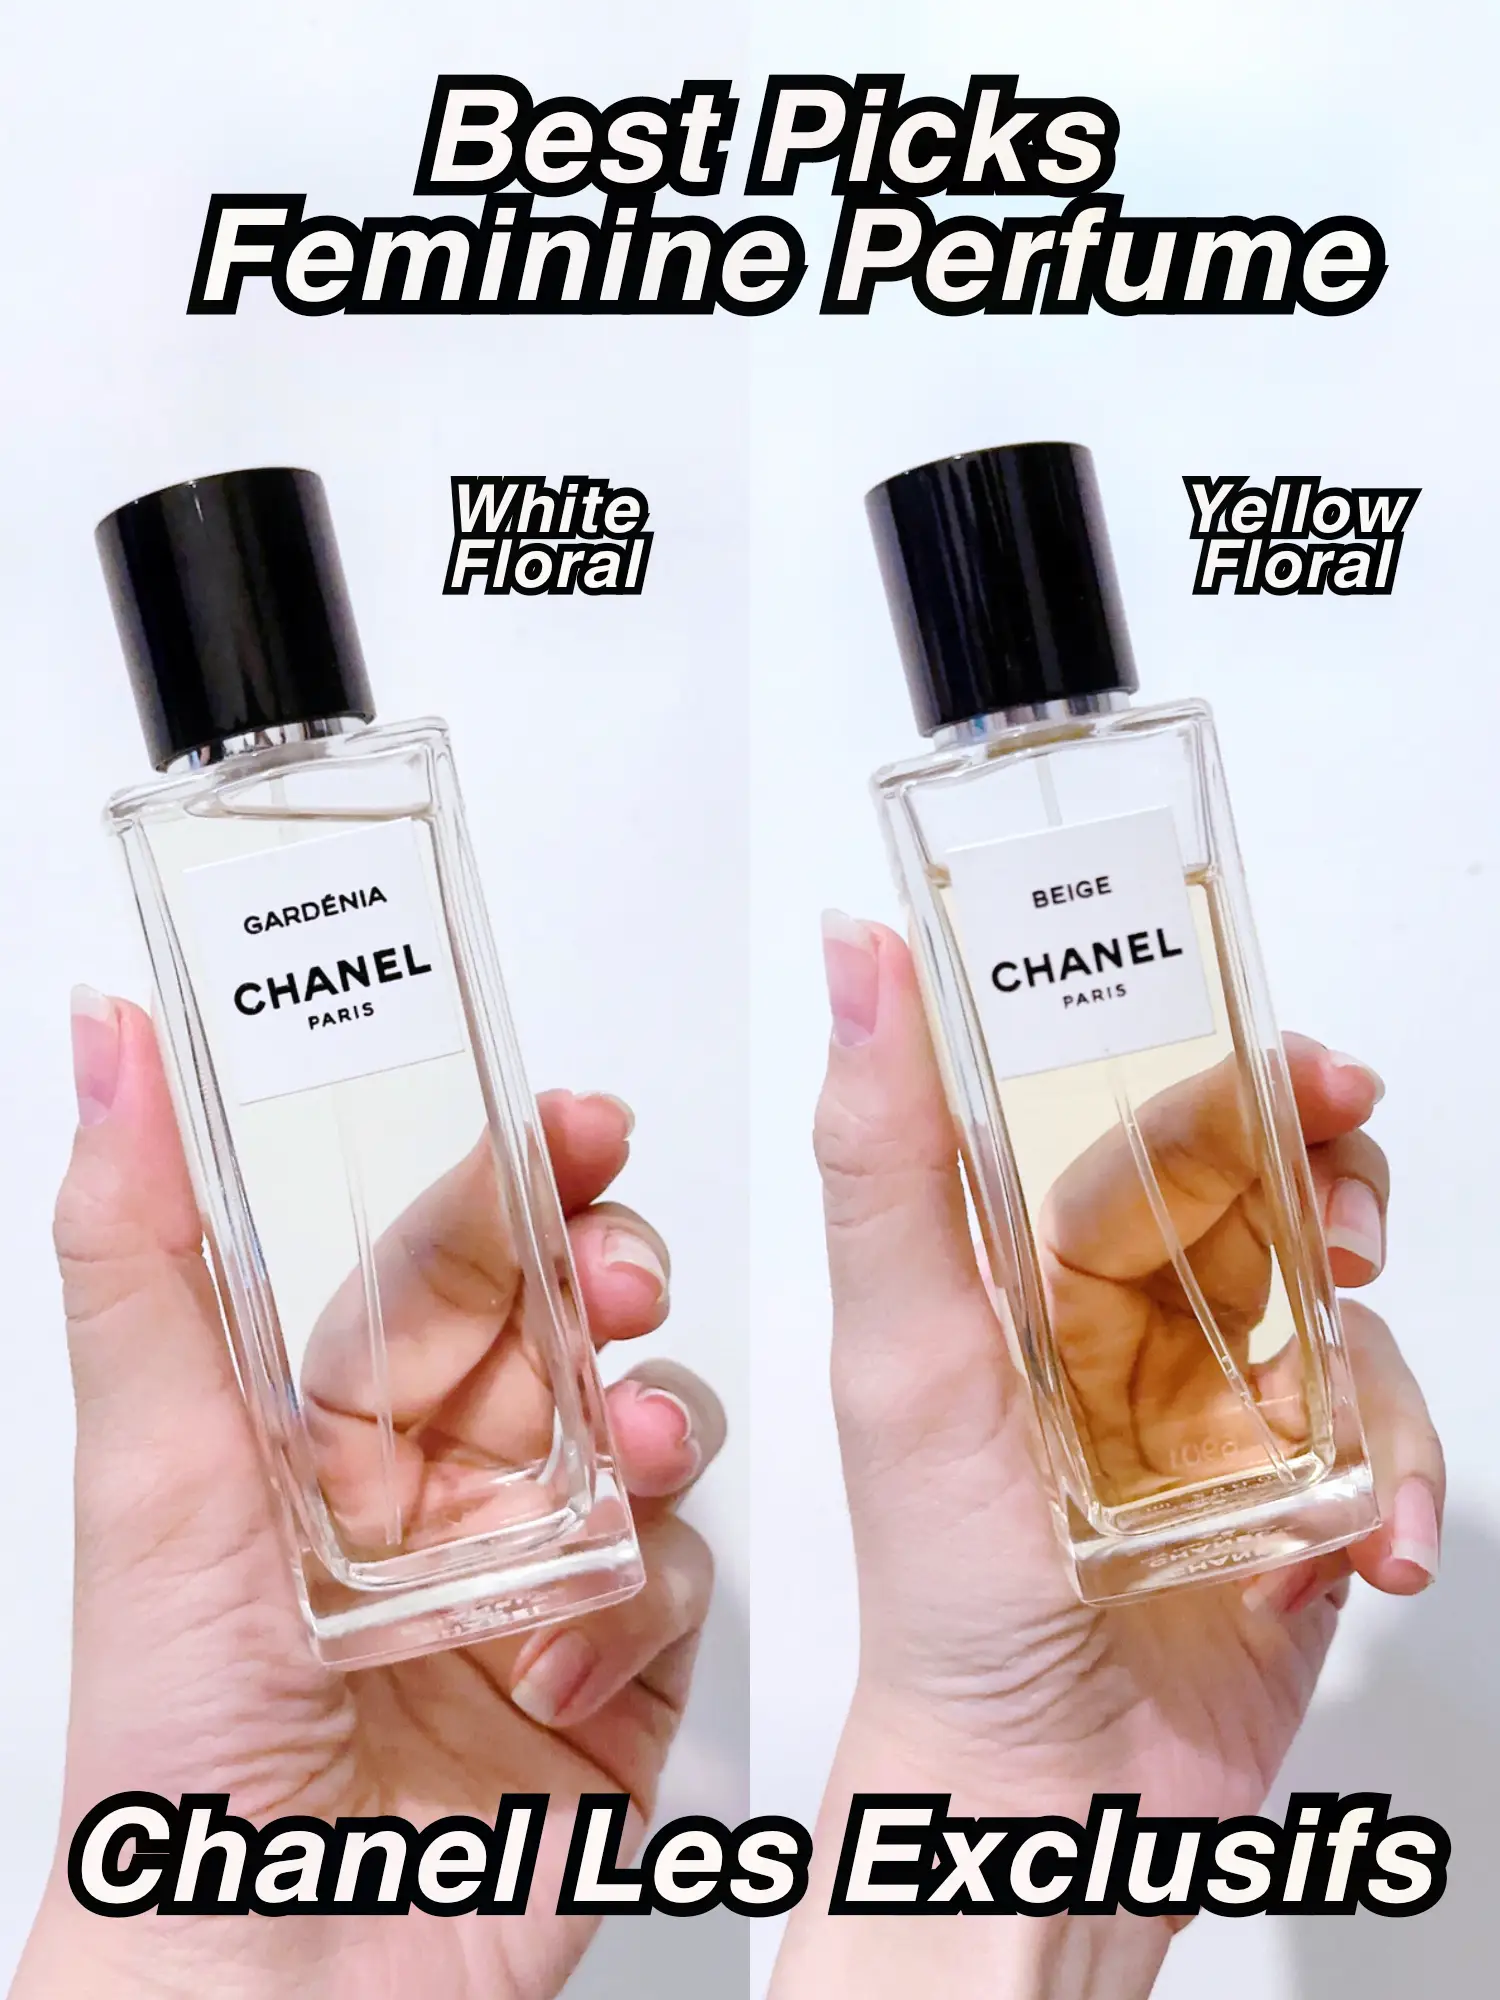 Parfum Chanel Les Exclusifs Wajib Punya 💐, Gallery posted by stefaniscents